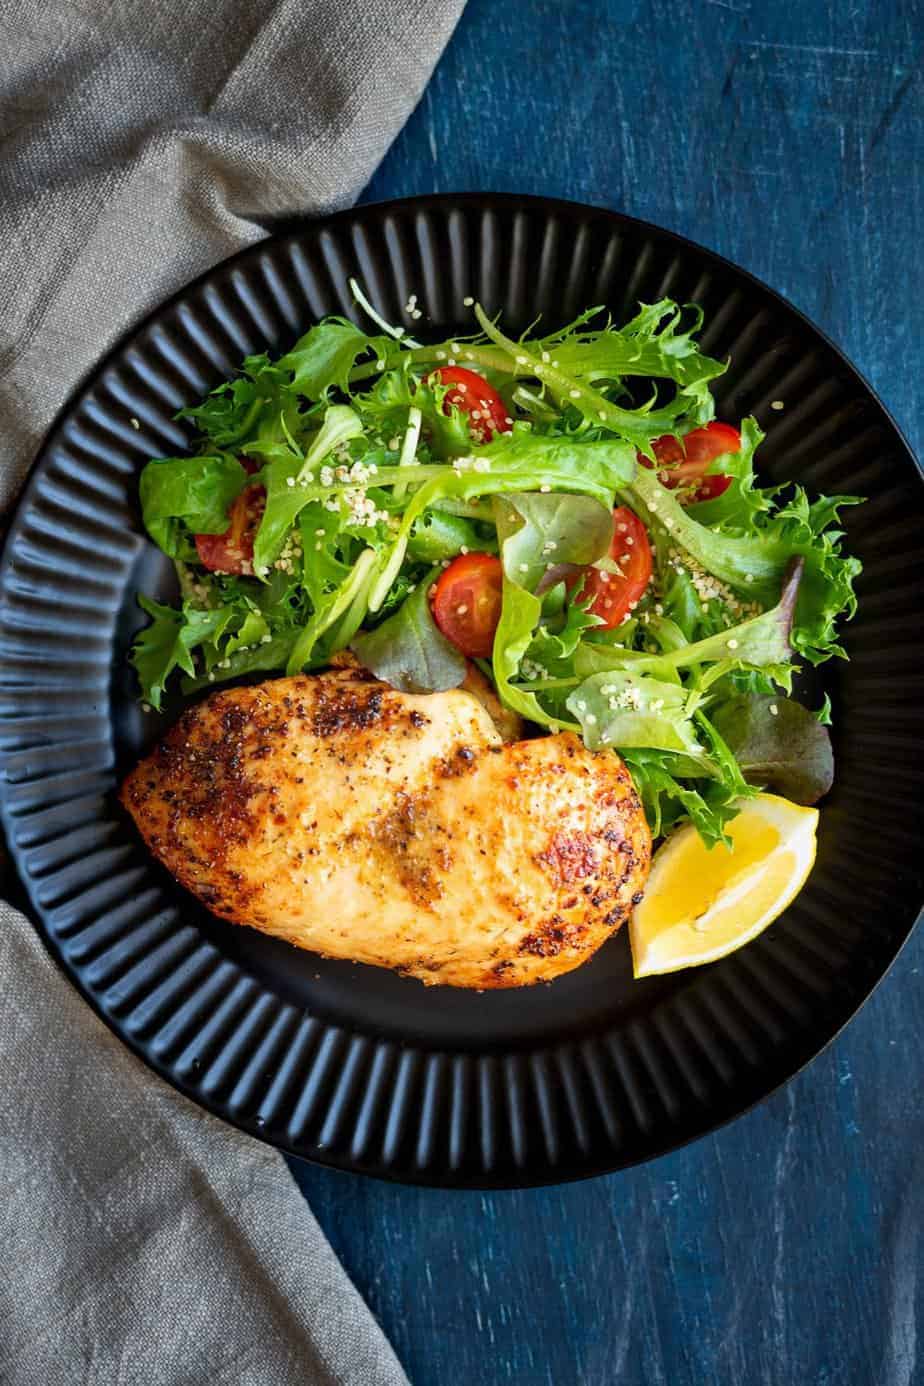 Excellently cooked chicken served with a salad of baby lettuces blend and cherry tomatoes.